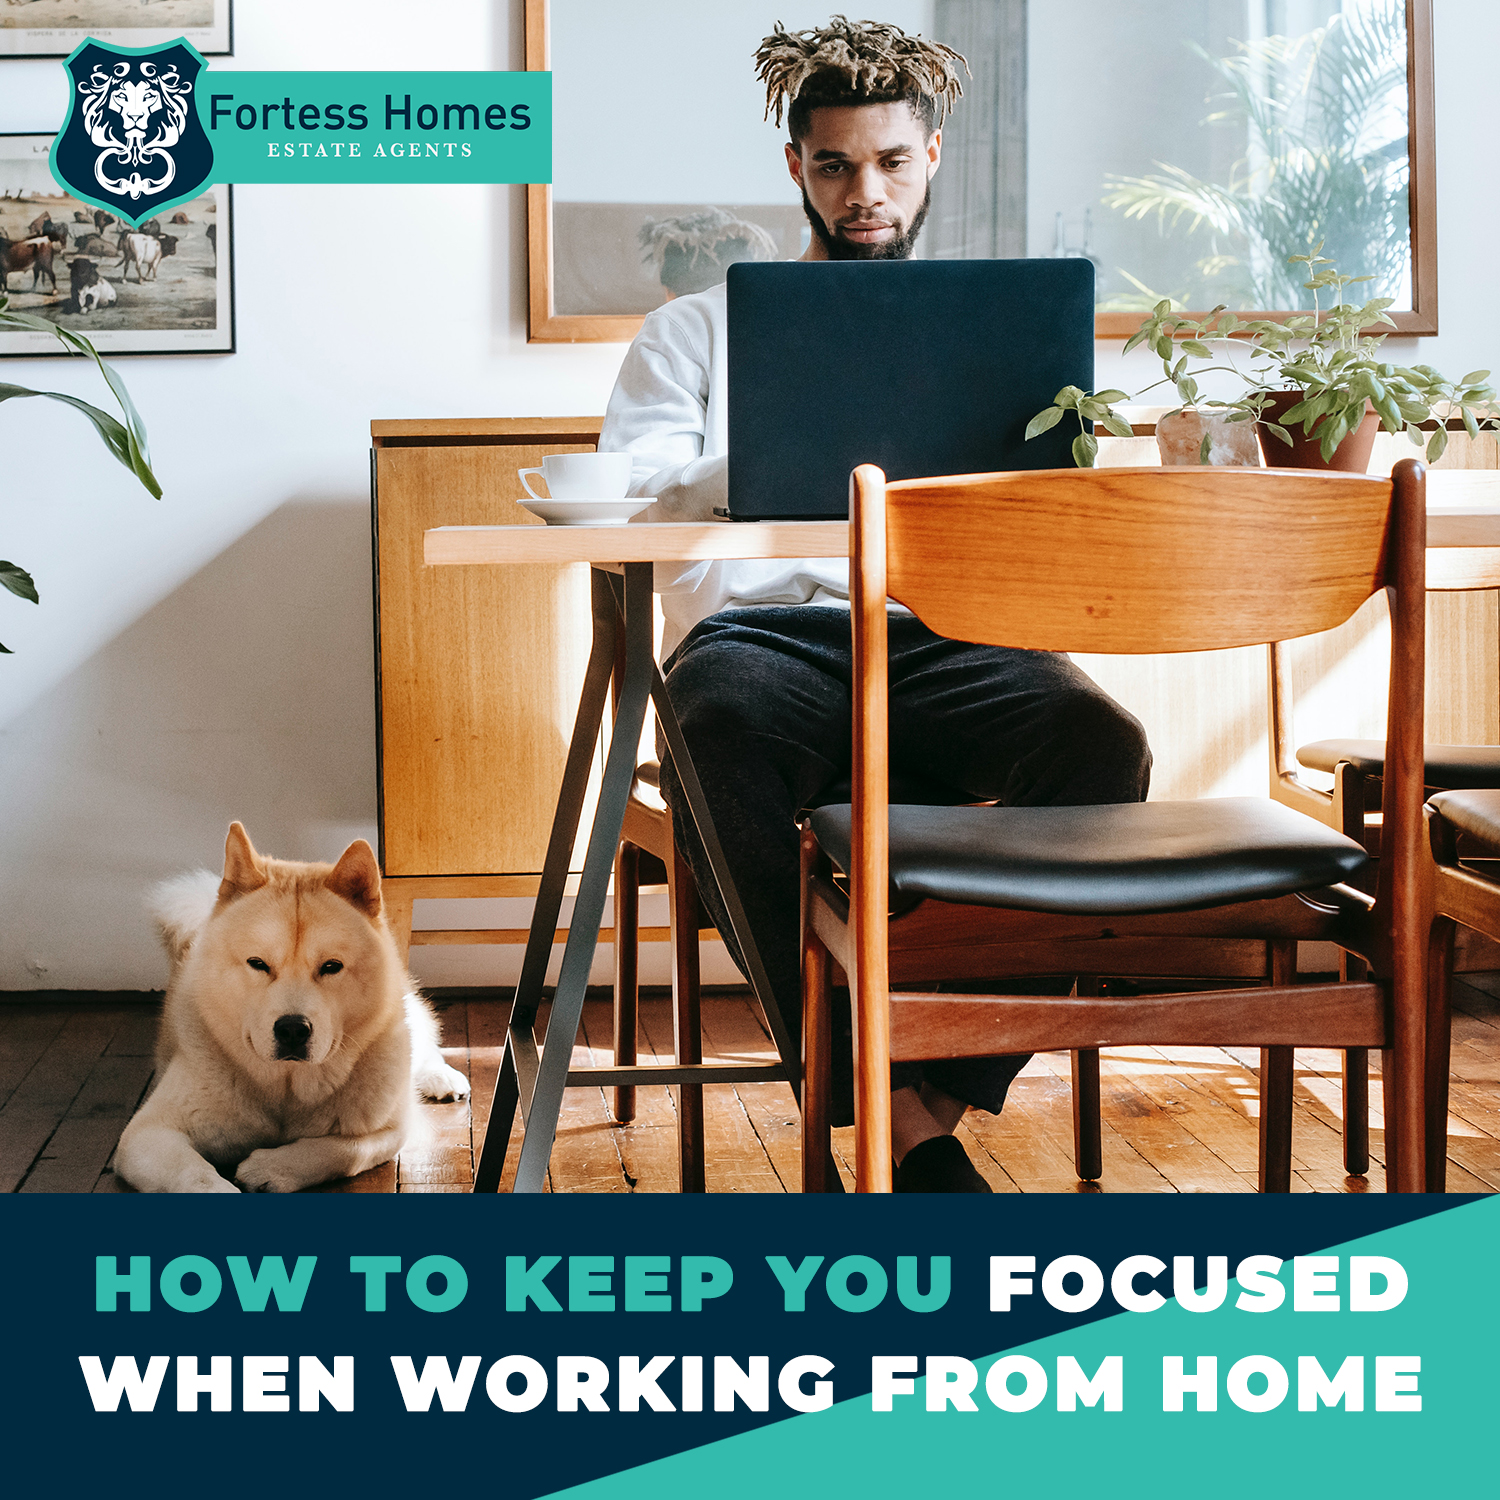 HOW TO KEEP YOU FOCUSED WHEN WORKING FROM HOME